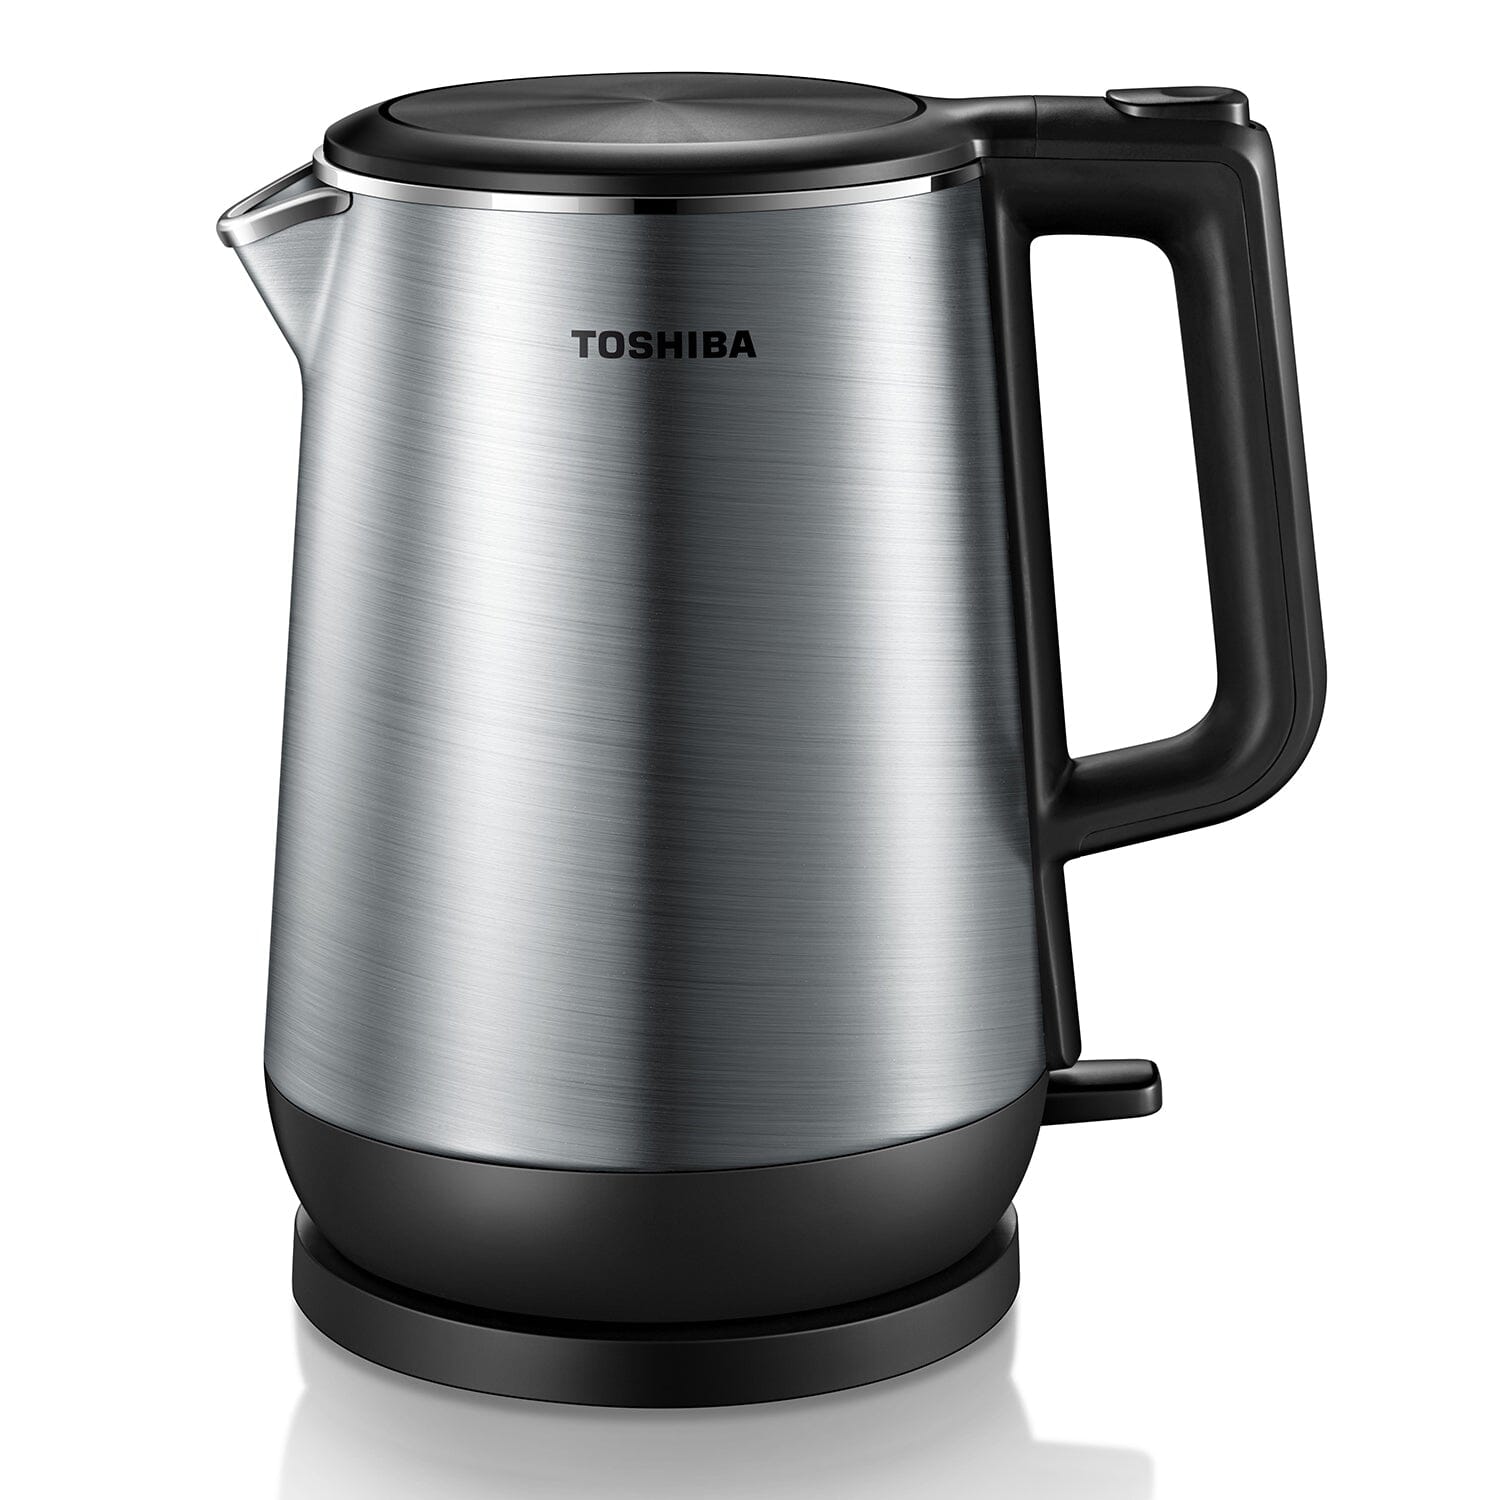 Toshiba 1.5L/1.7L Stainless Steel Double Wall Protection Fast Boilling Electric Jug Kettle Toshiba 1.7L Silver 